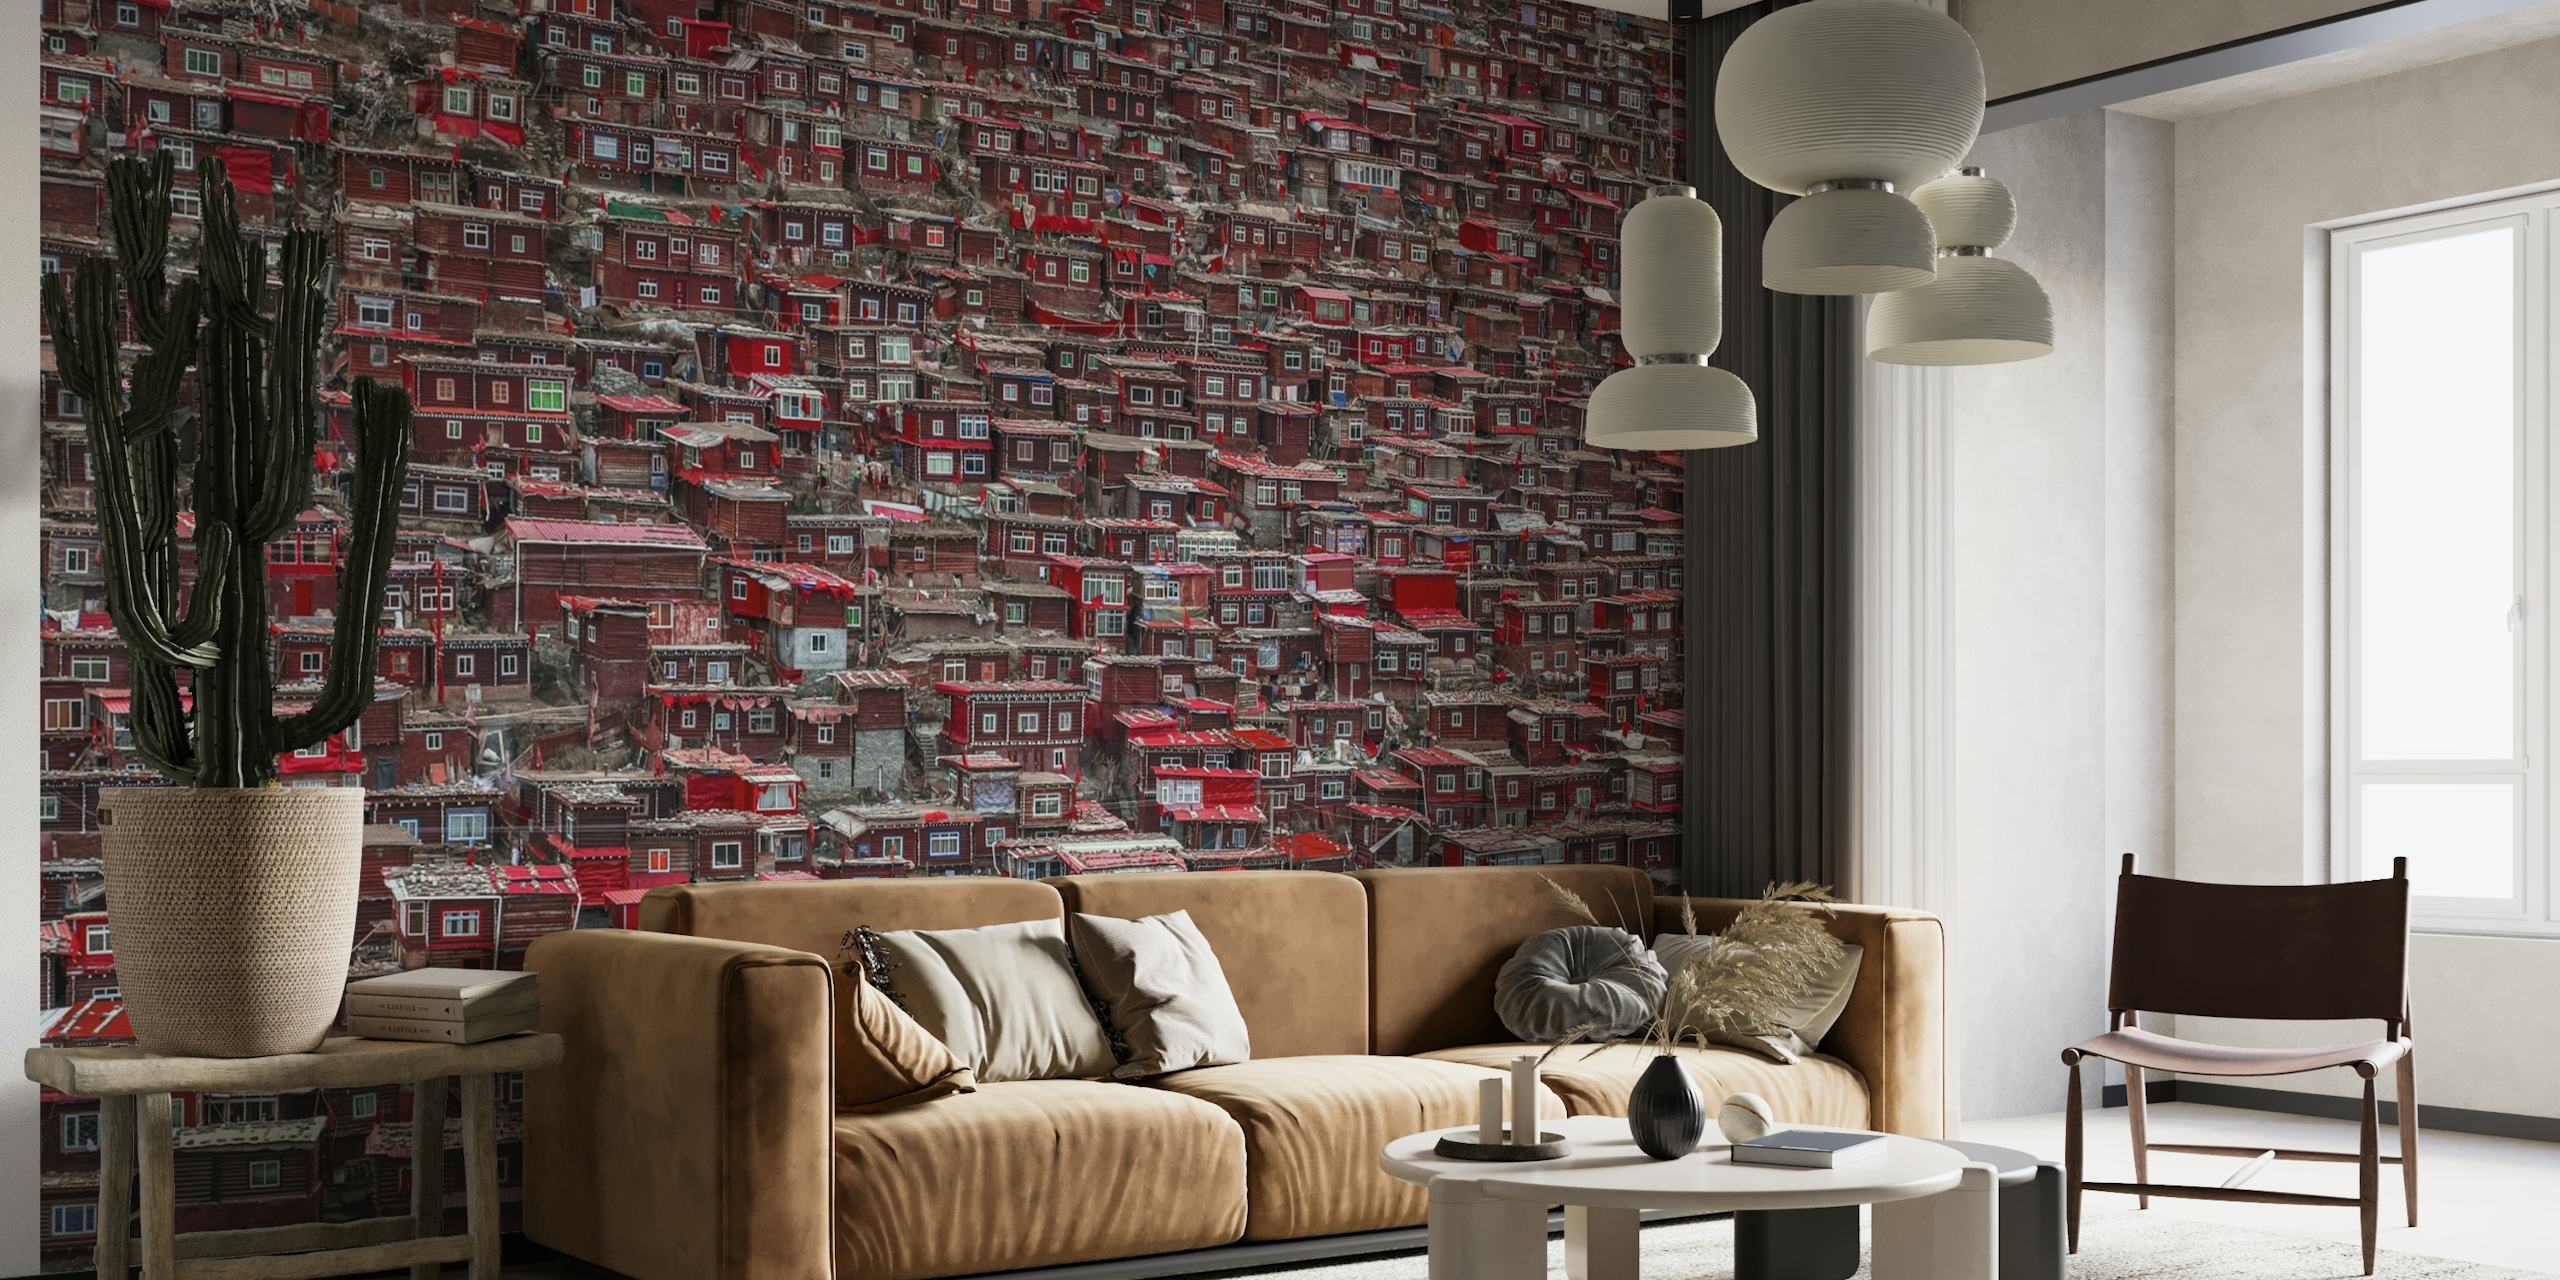 Wall mural of densely packed red-roofed houses creating a vibrant, intricate townscape pattern